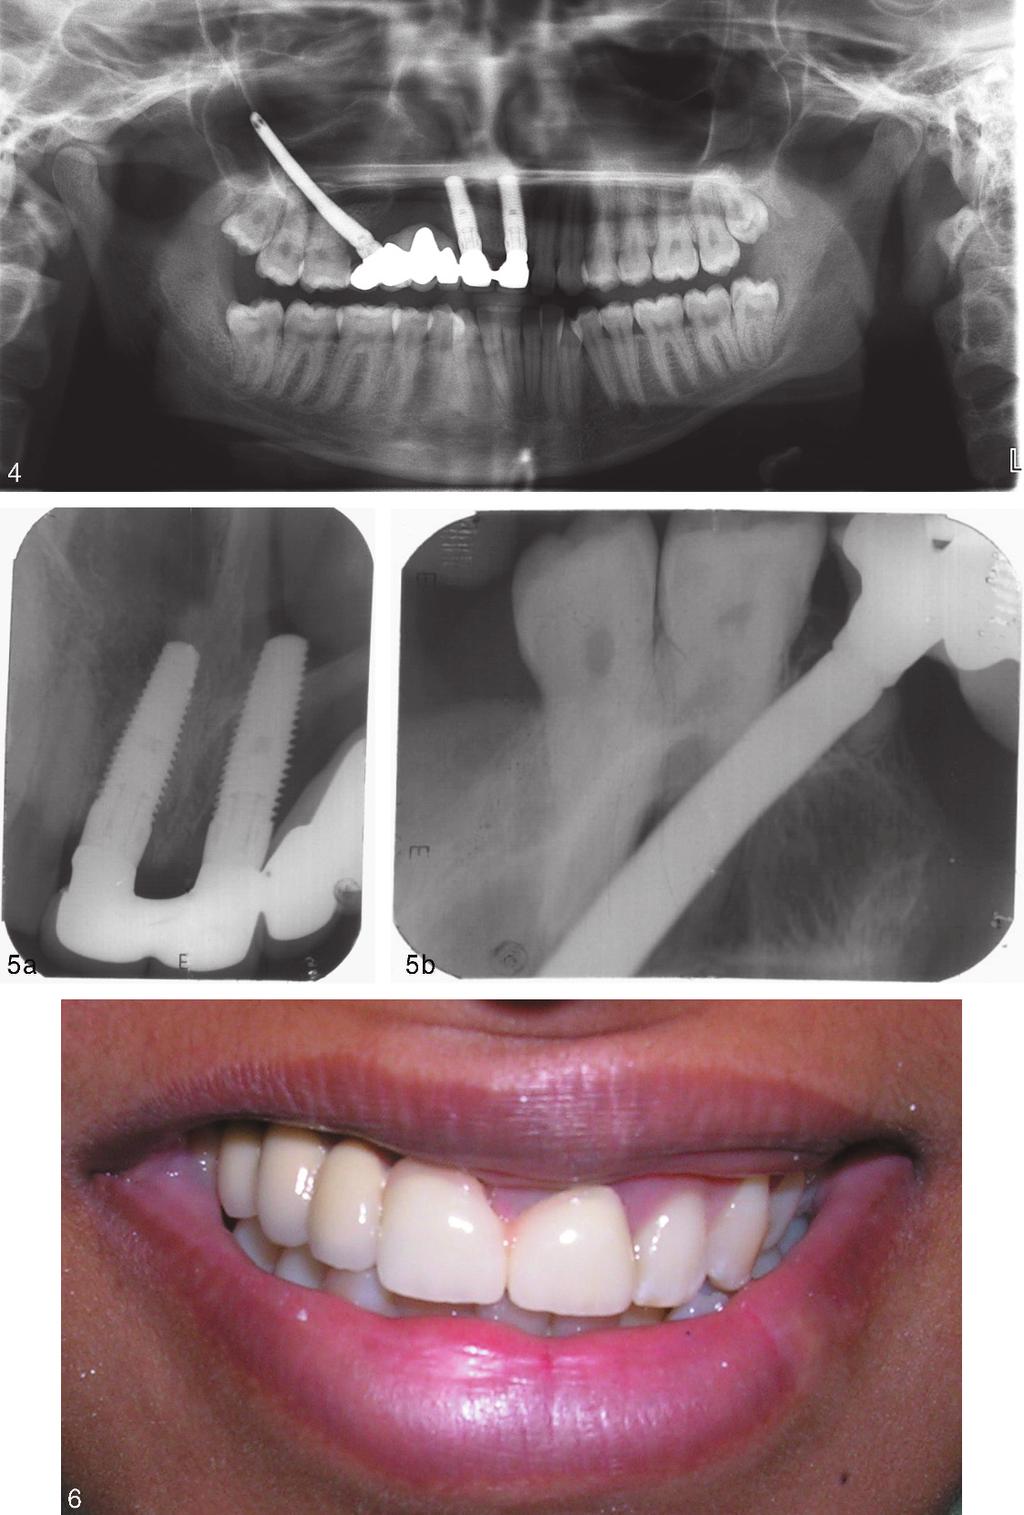 Zygoma Implant-Retained Fixed Partial Denture FIGURES 4 6. FIGURE 4. Panoramic view of the maxillae and mandible (8 months post-treatment). FIGURE 5.